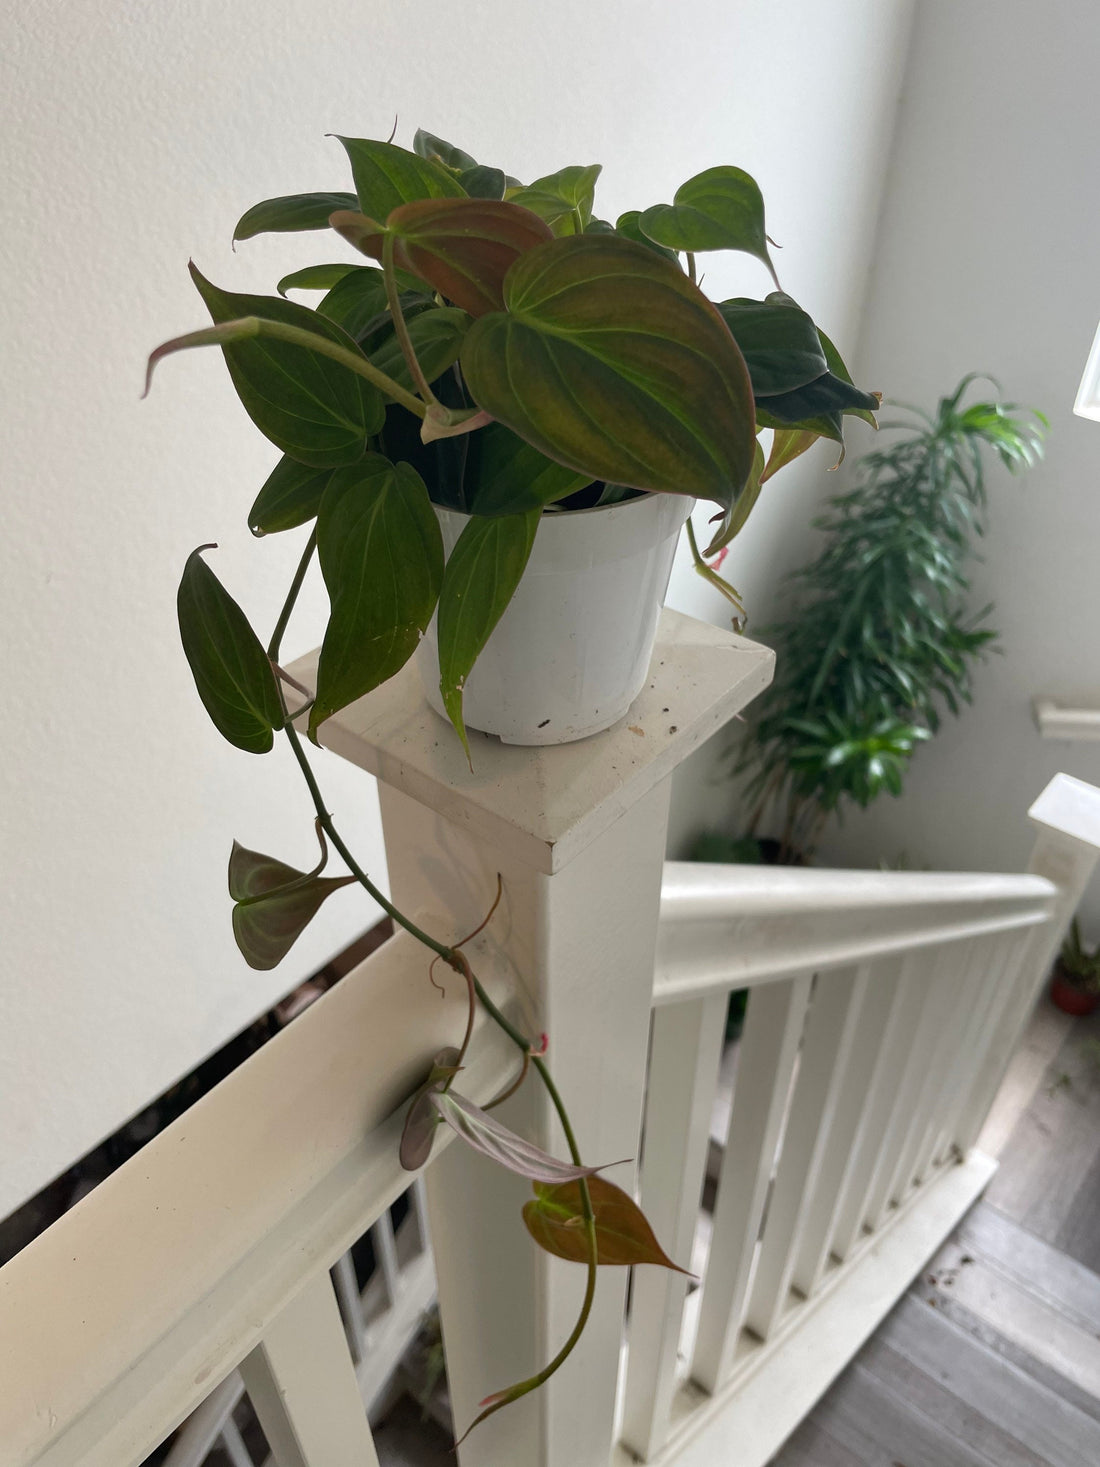 Trailing Large -4 inch Live Potted- Philodendron mican-velvet bronze black leaves .